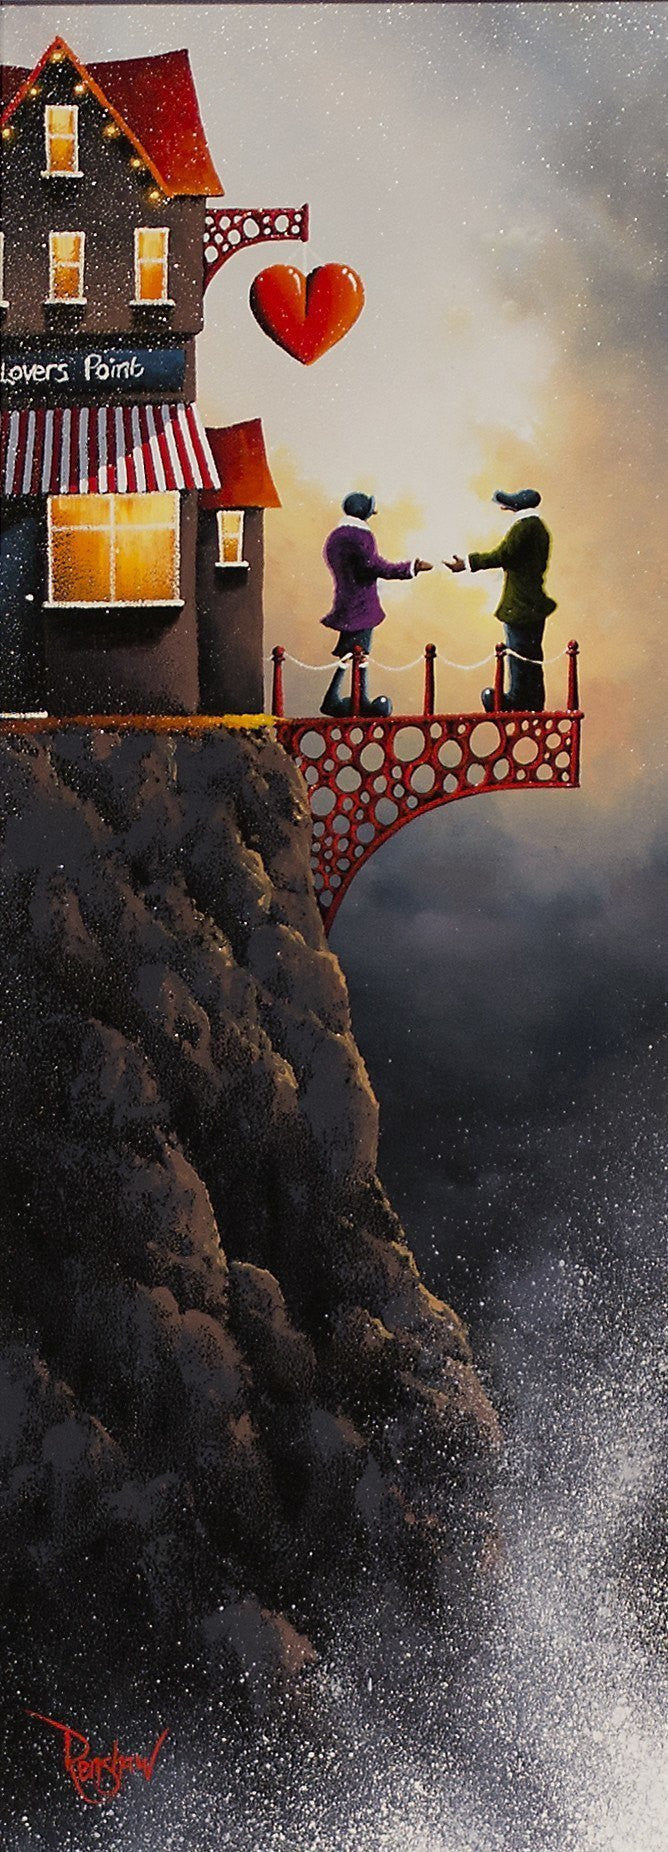 Lovers Point - SOLD David Renshaw Lovers Point - SOLD